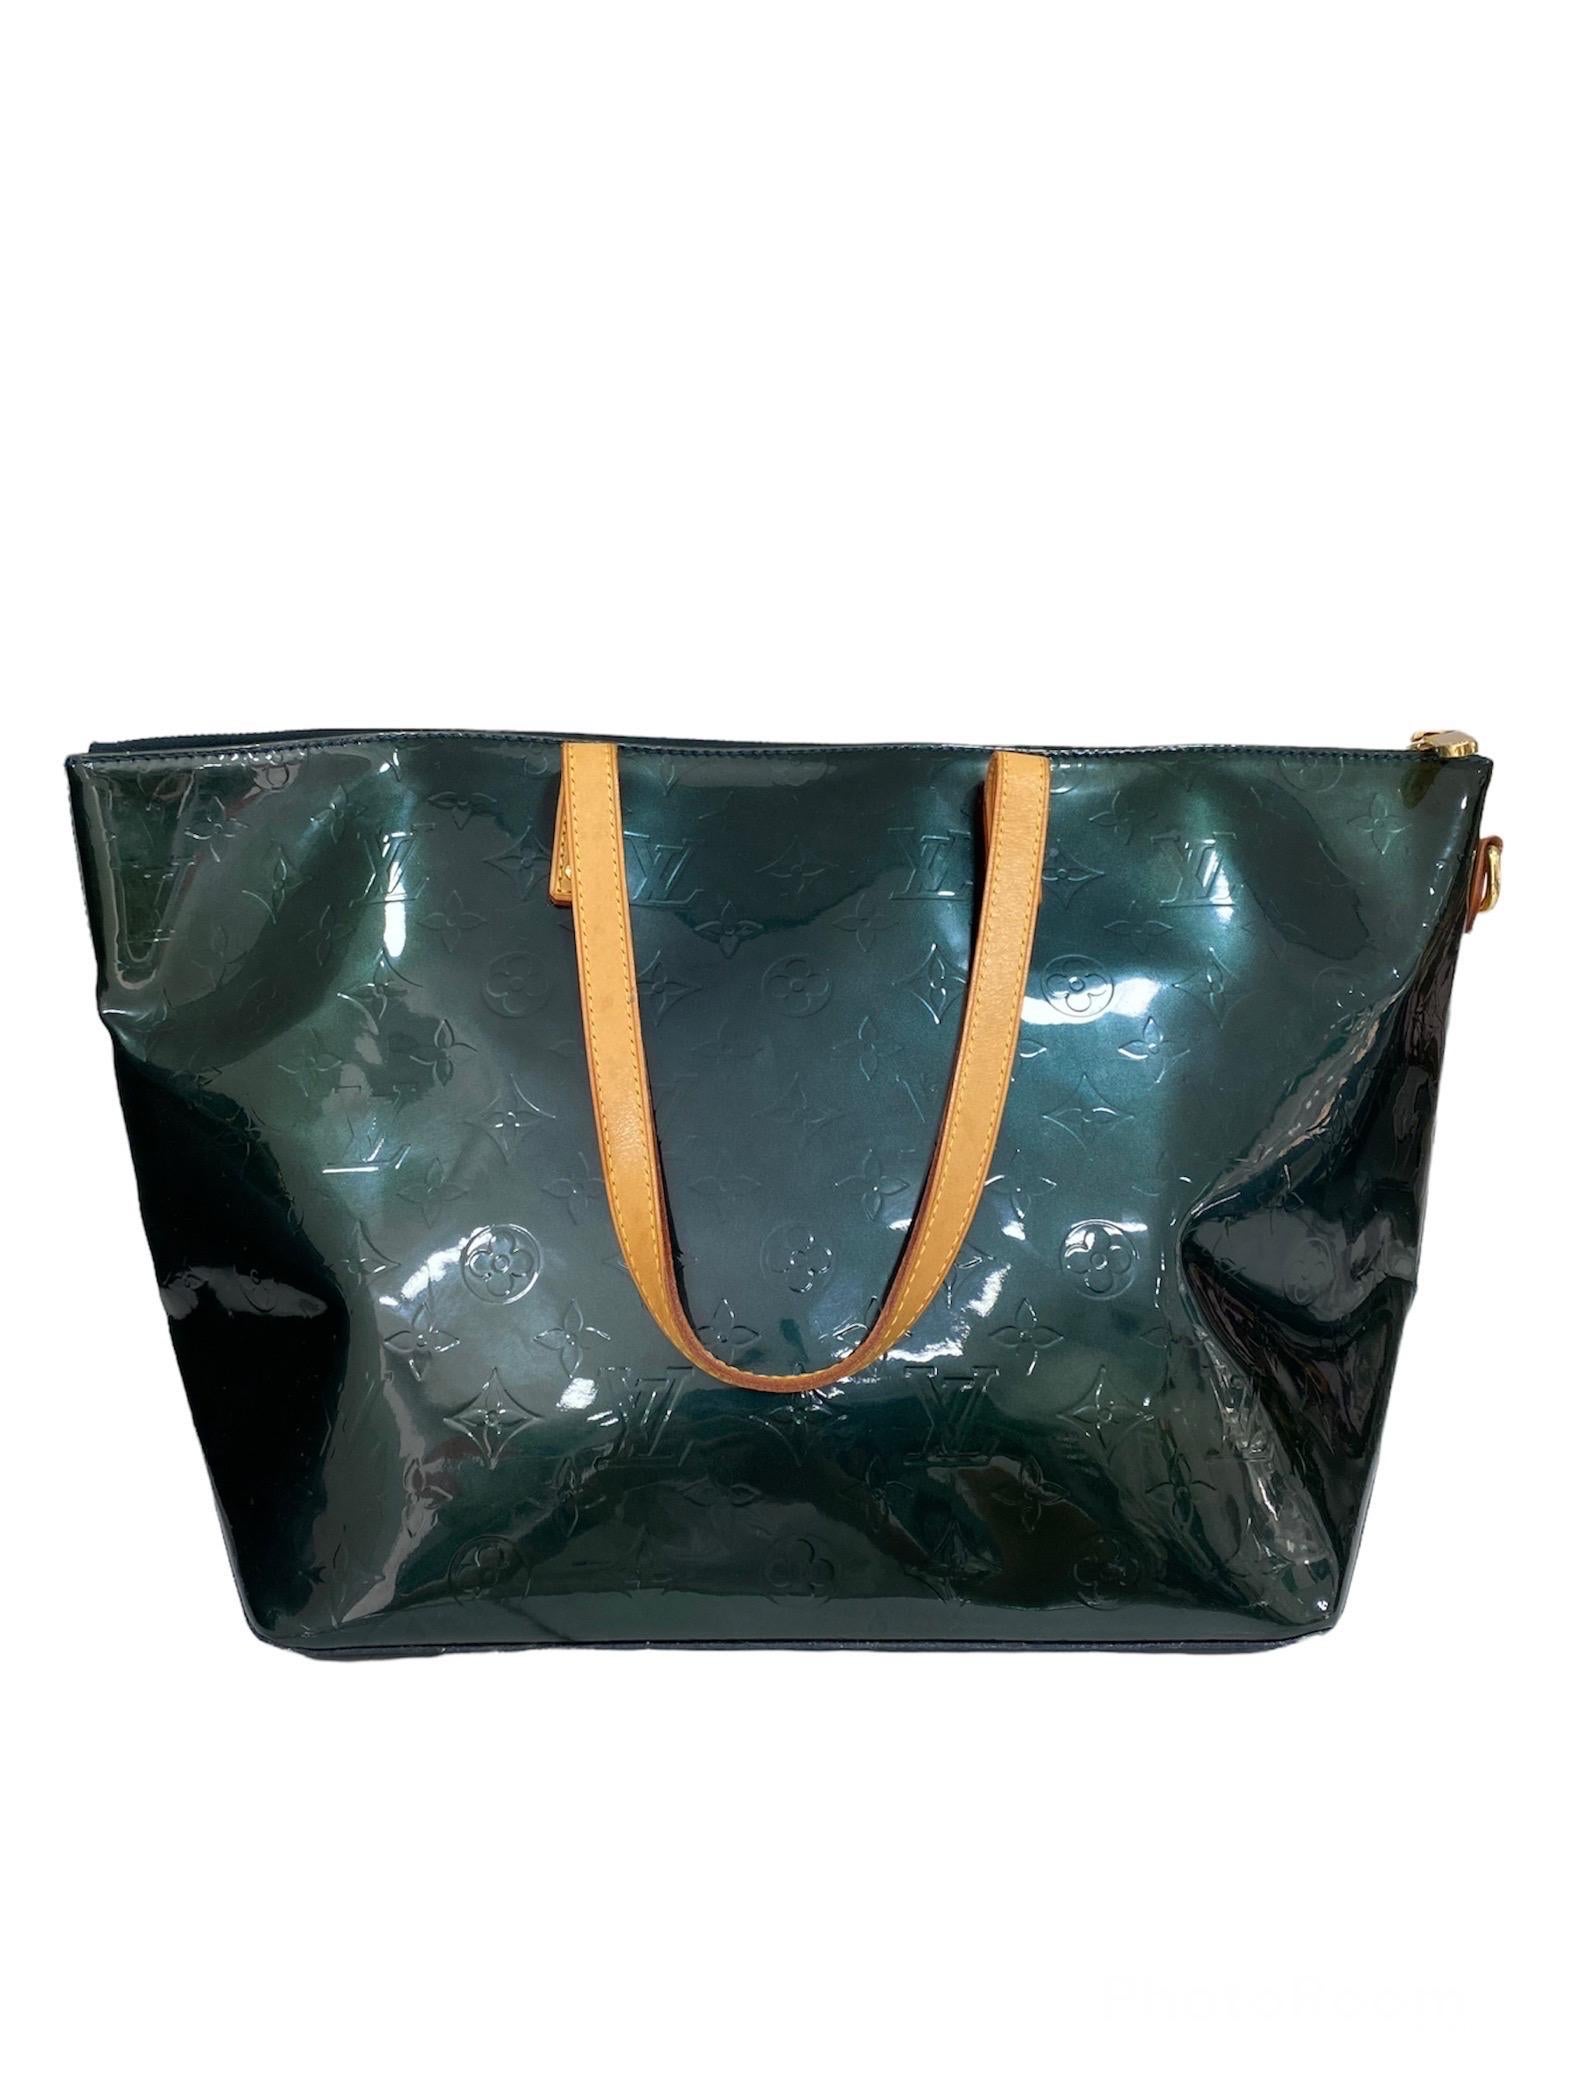 Shopper bag signed Louis Vuitton, Bellevou model, made of bottle green patent leather with cowhide inserts and golden hardware.

Equipped with a zip closure, internally lined in green fabric, very roomy.

Equipped with double thin cowhide handle and